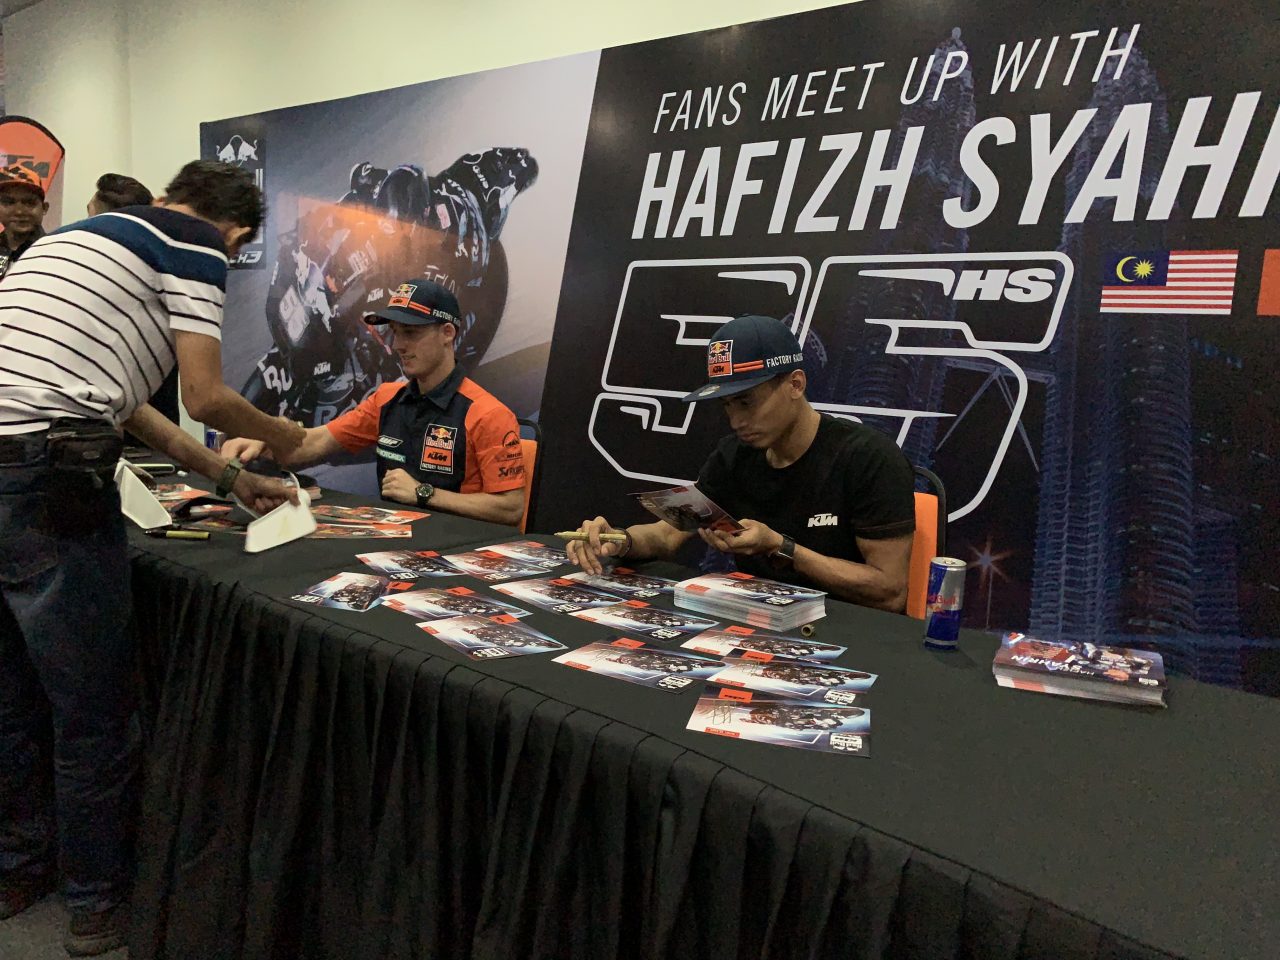 Hafizh Syahrin: Looking Forward to Great Results with KTM ...